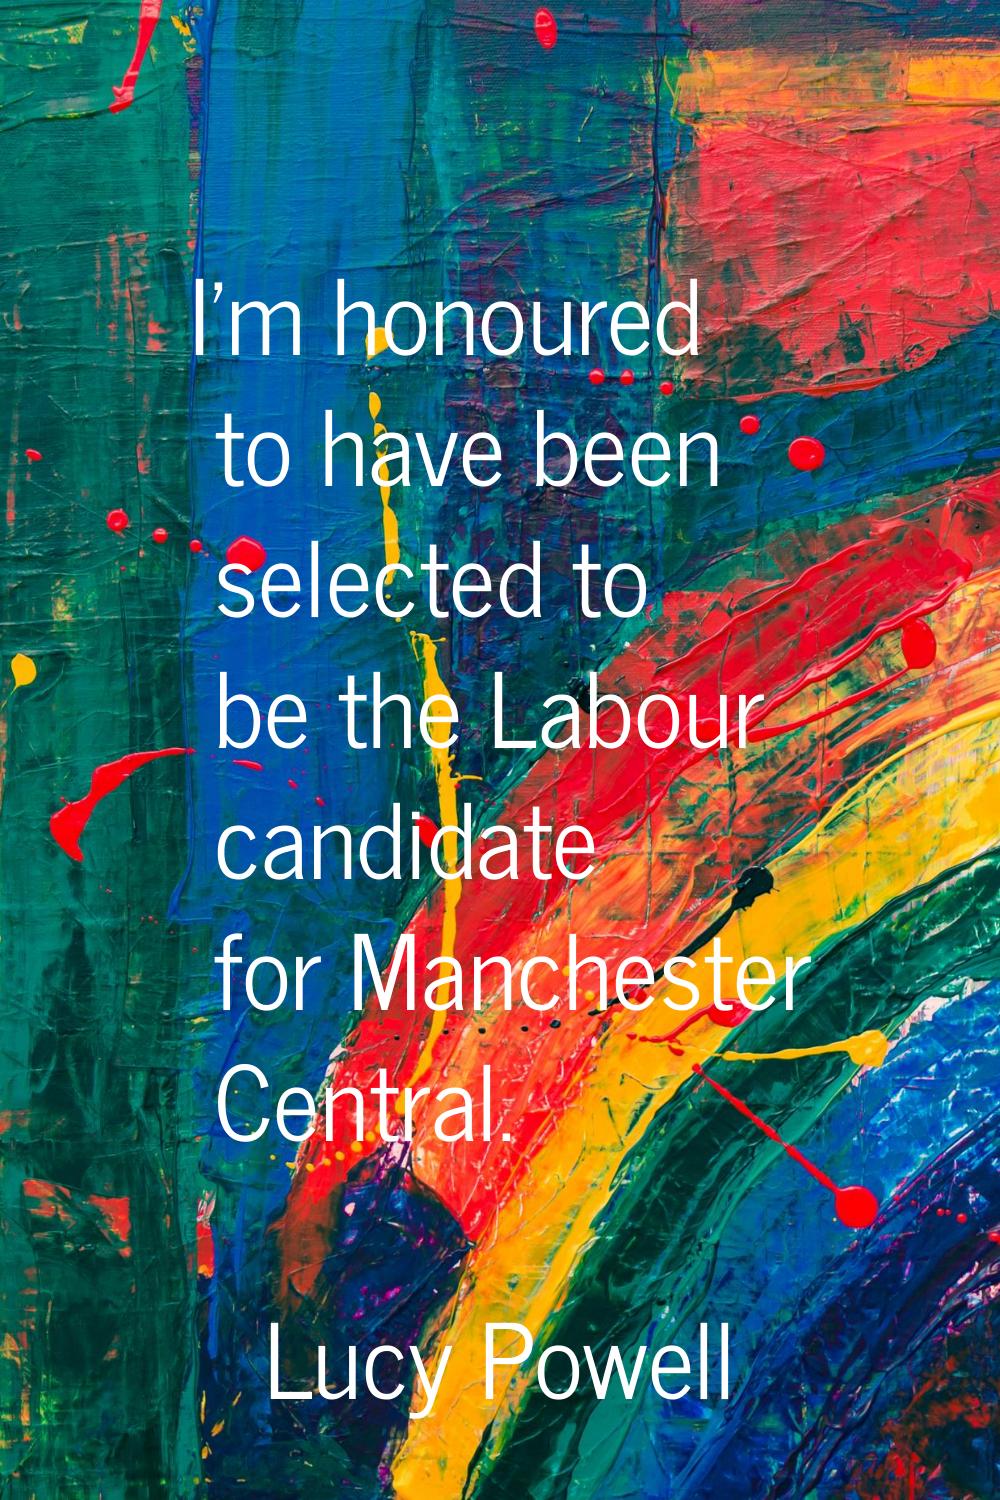 I'm honoured to have been selected to be the Labour candidate for Manchester Central.